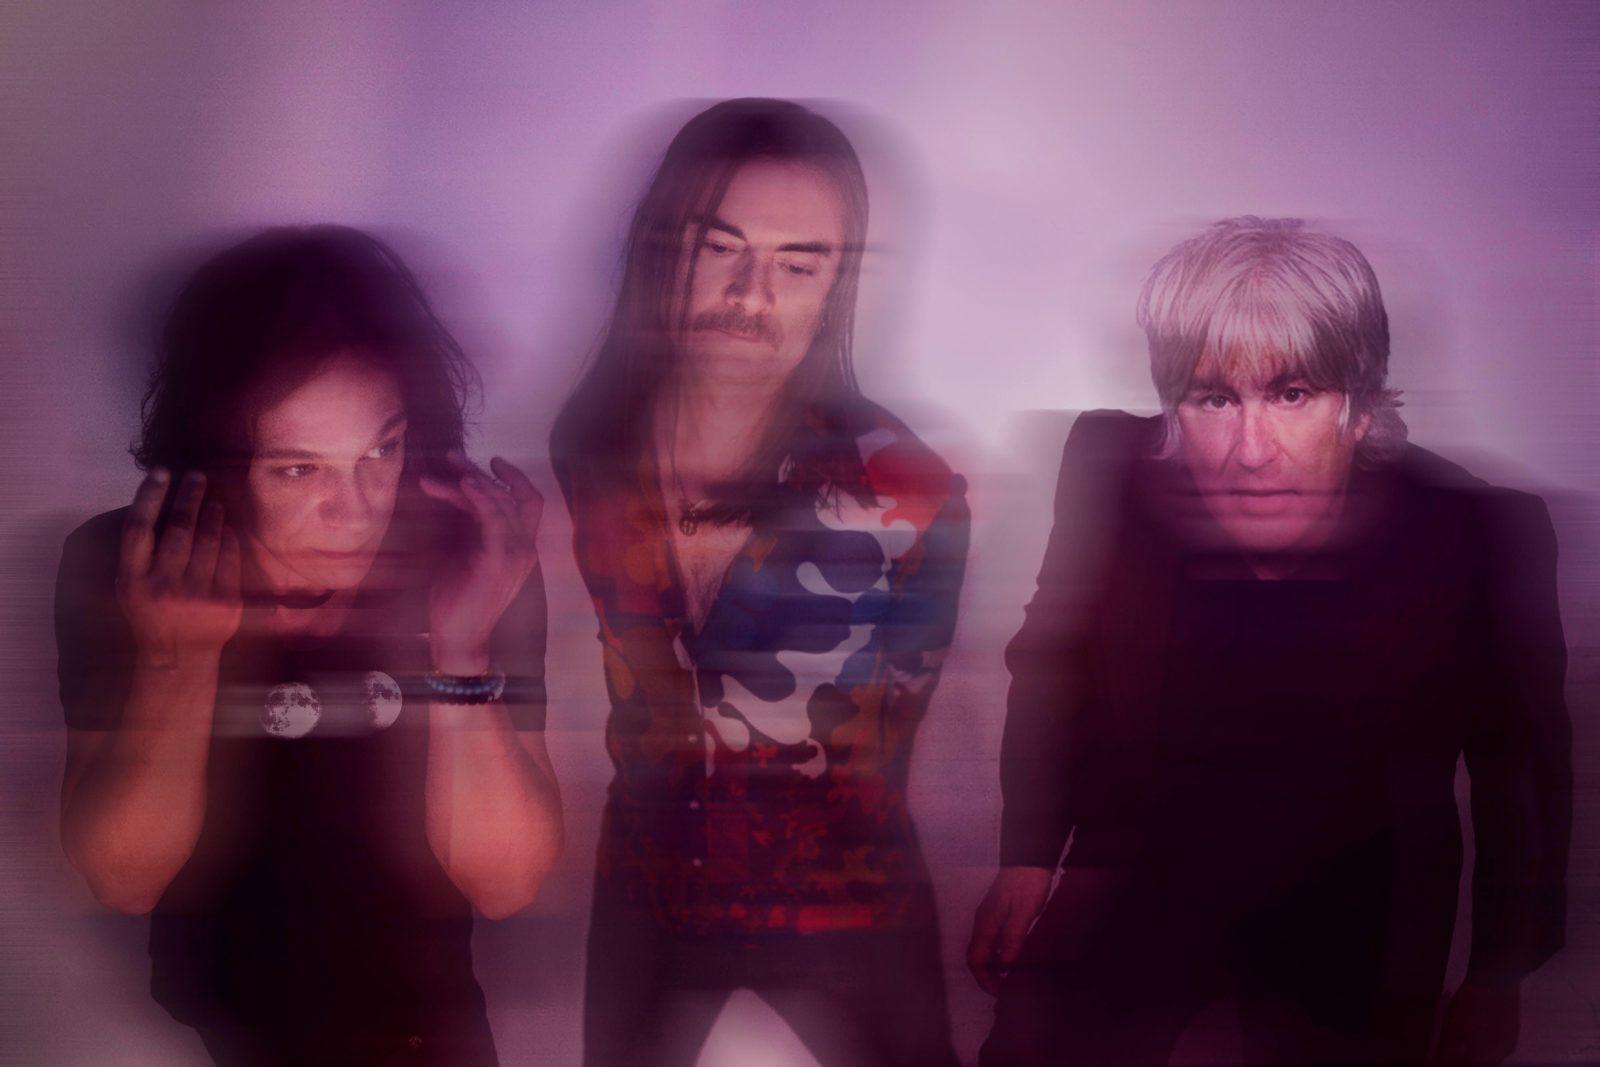 psychedelic image of 3 band members